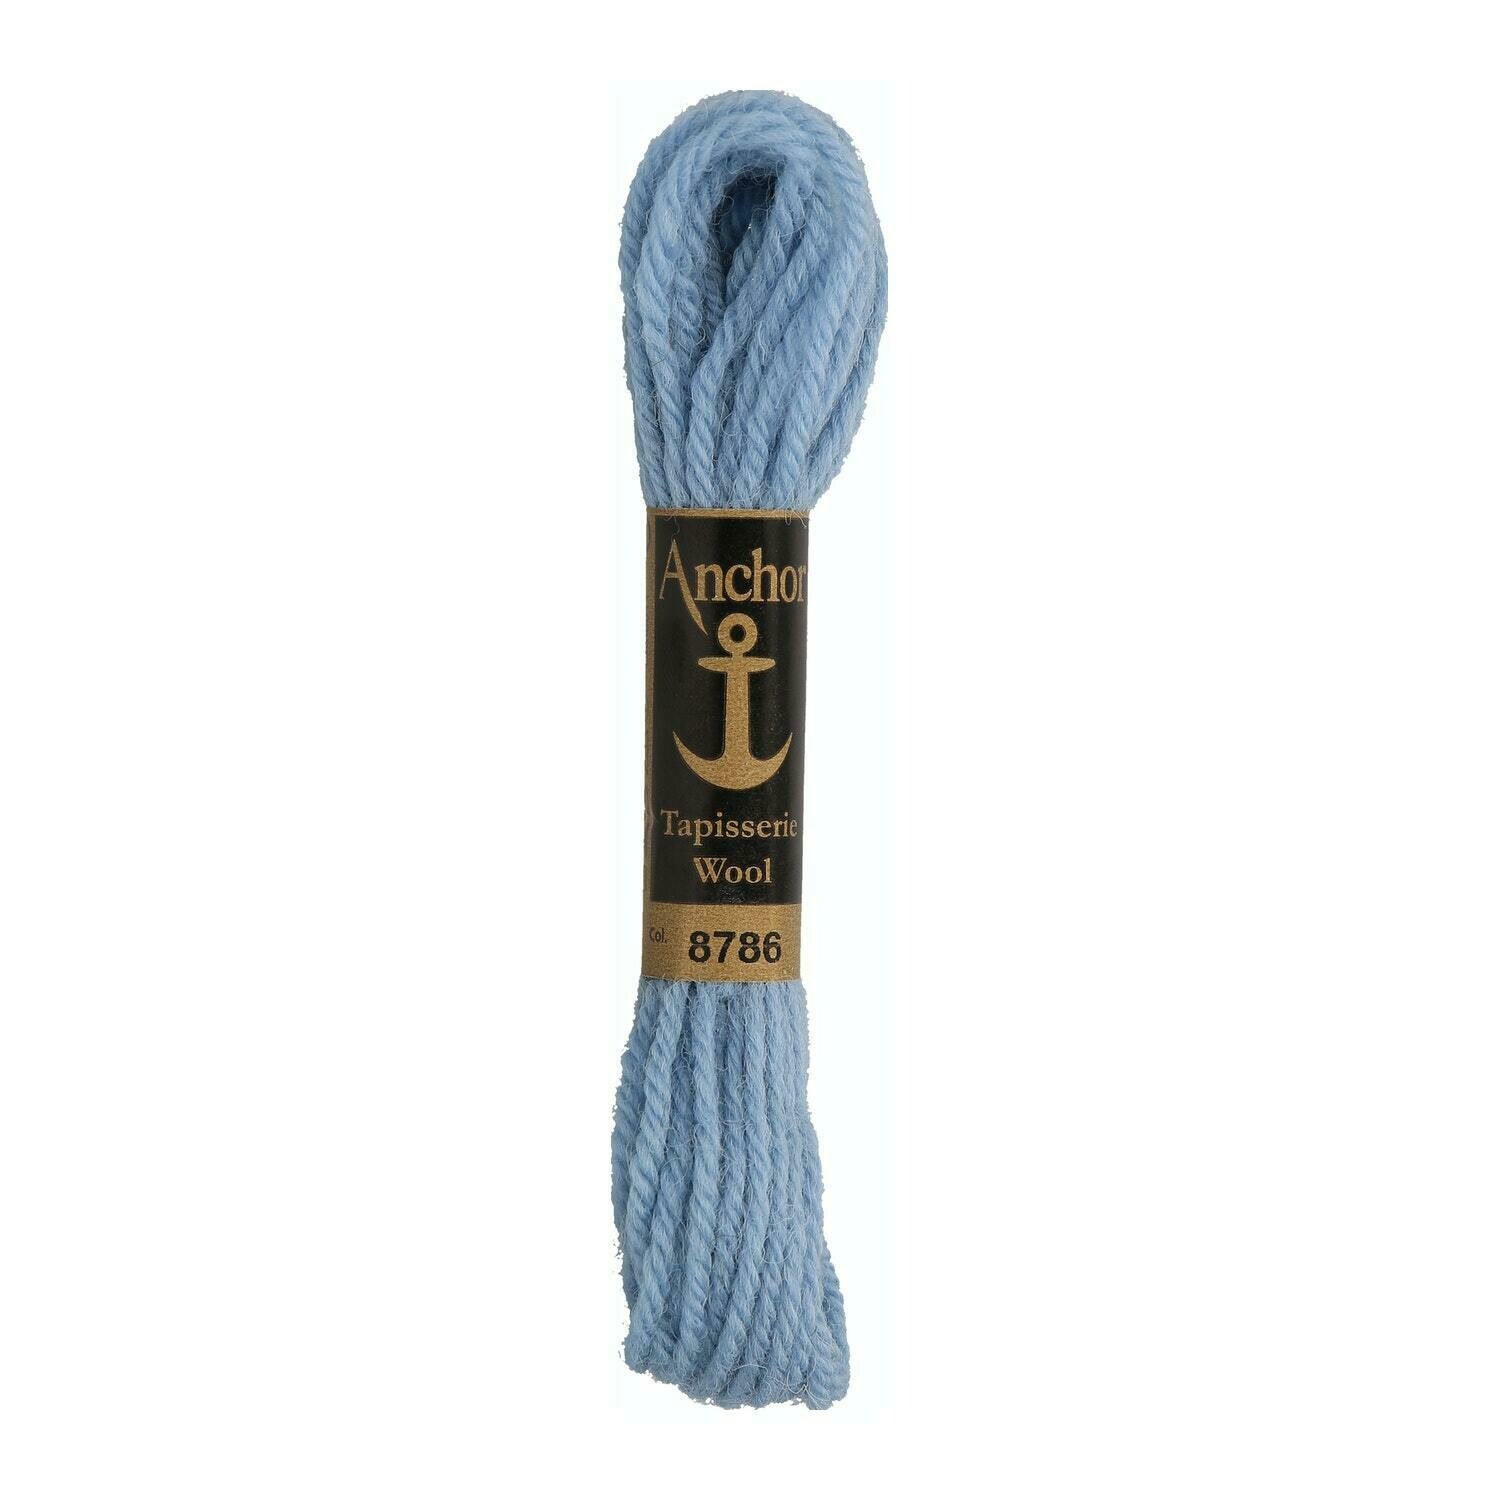 Anchor Tapisserie Wool #08786